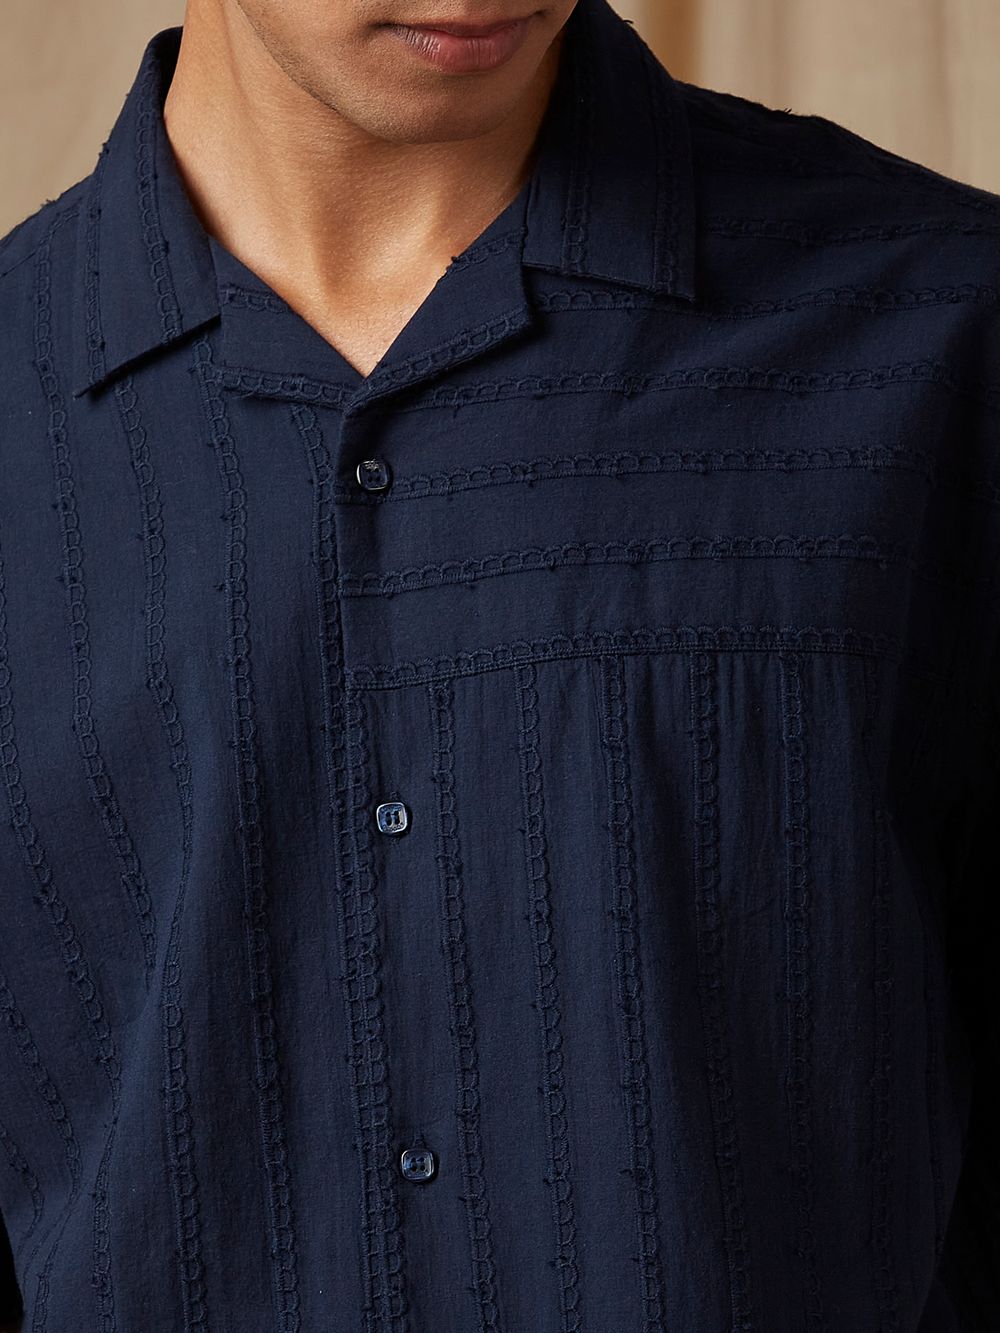 Navy Embroidered Plain Loose Fit Casual Shirt